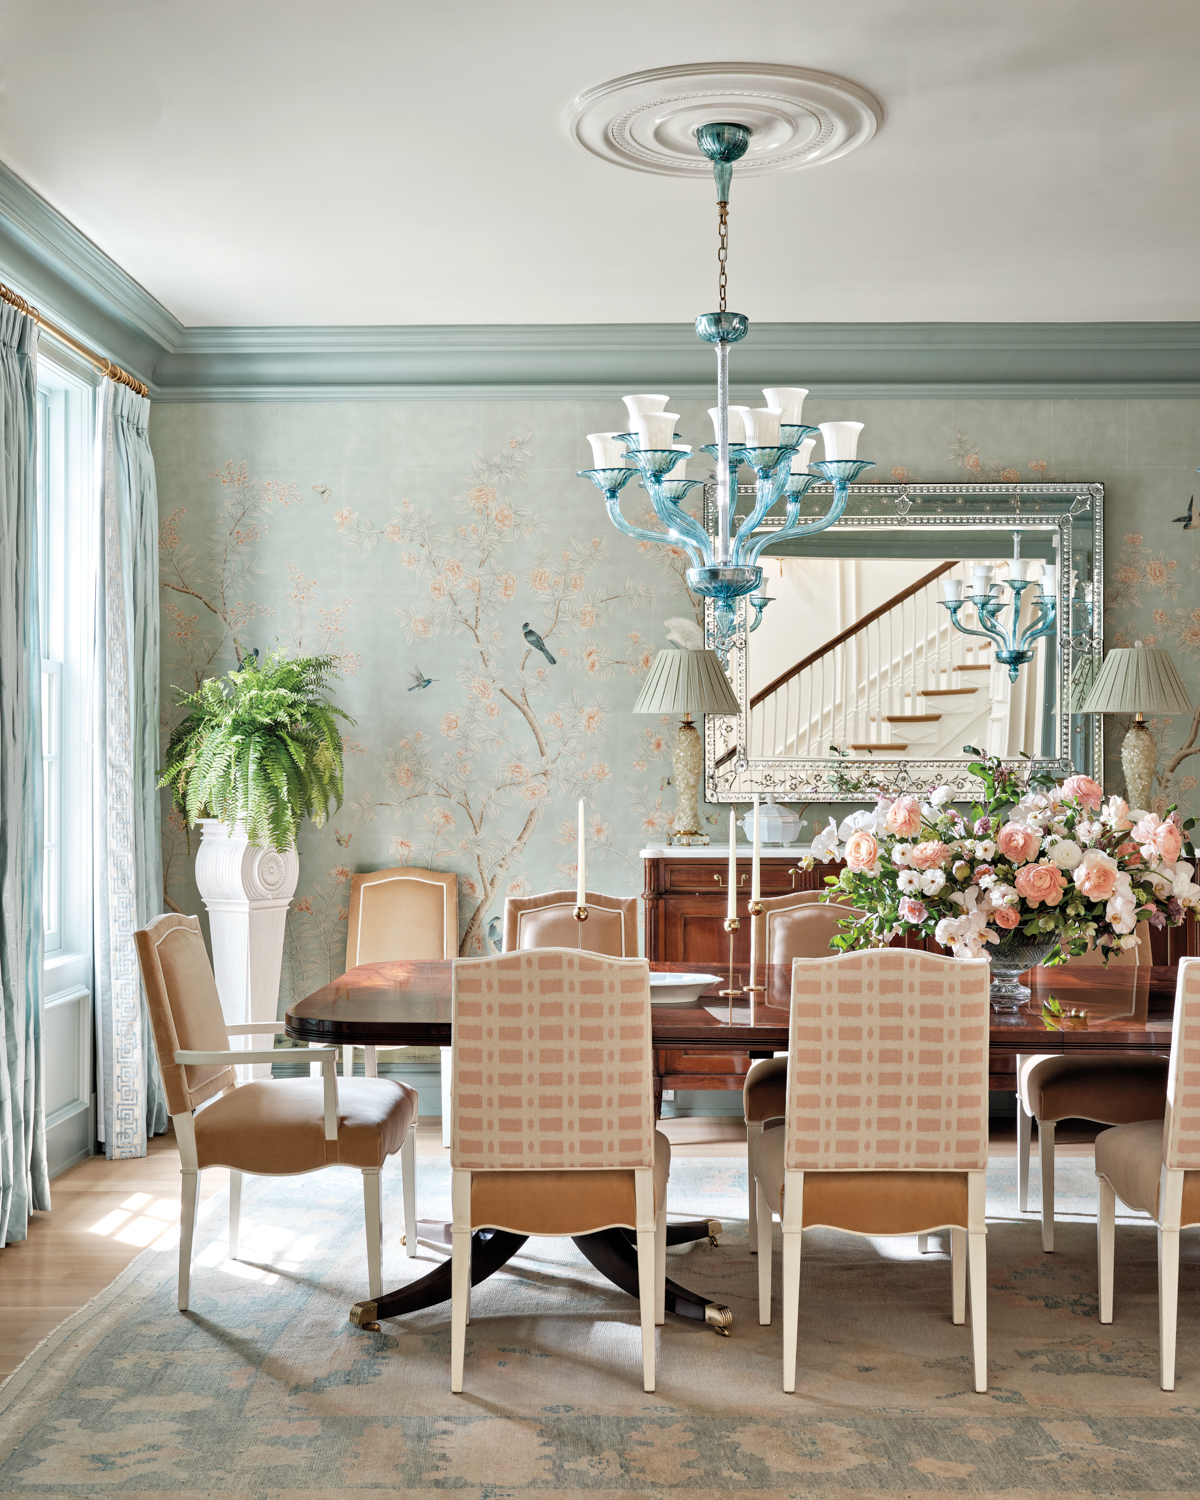 dining space with Murano-glass chandeliers and hand-painted wallpaper